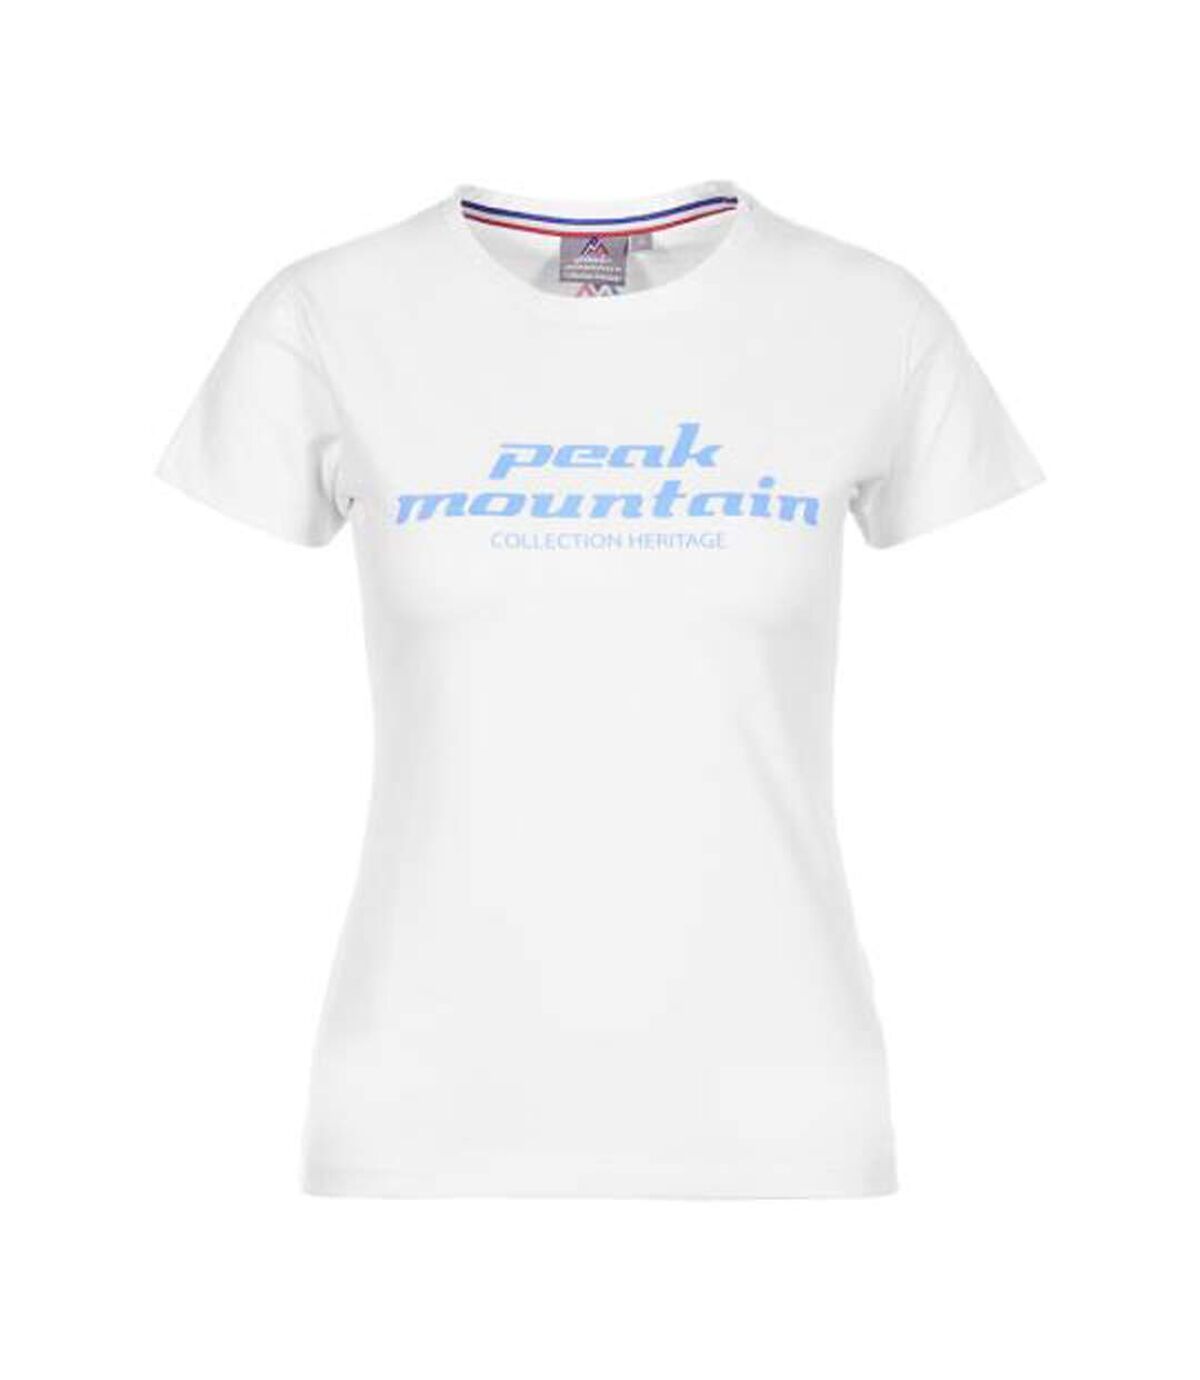 T-shirt manches courtes femme ACOSMO